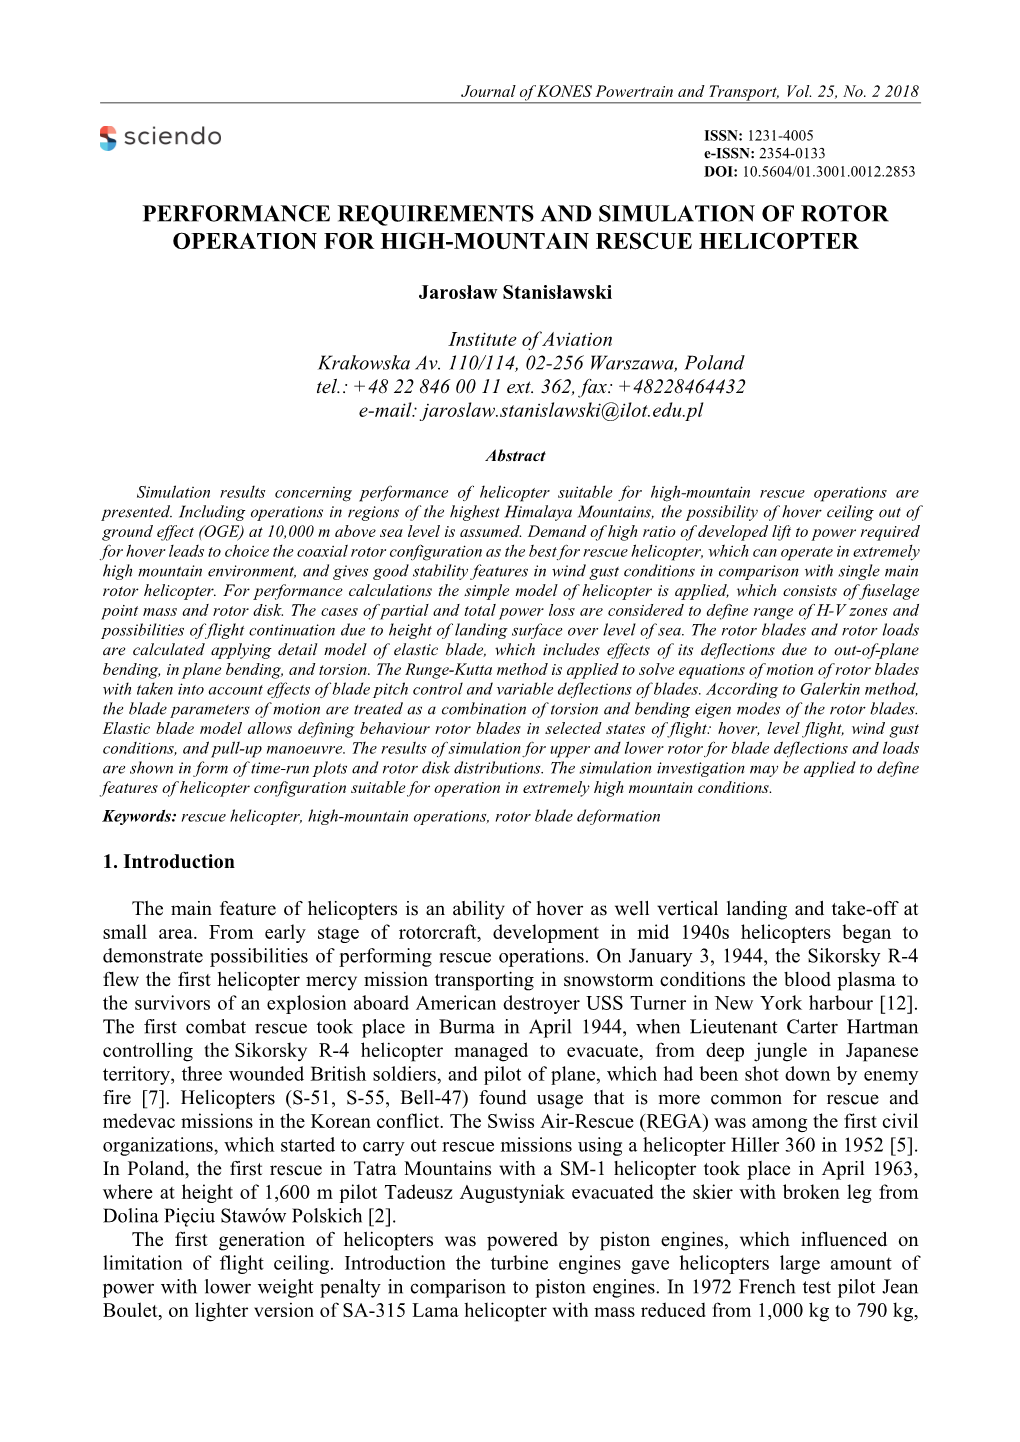 Performance Requirements and Simulation of Rotor Operation for High-Mountain Rescue Helicopter